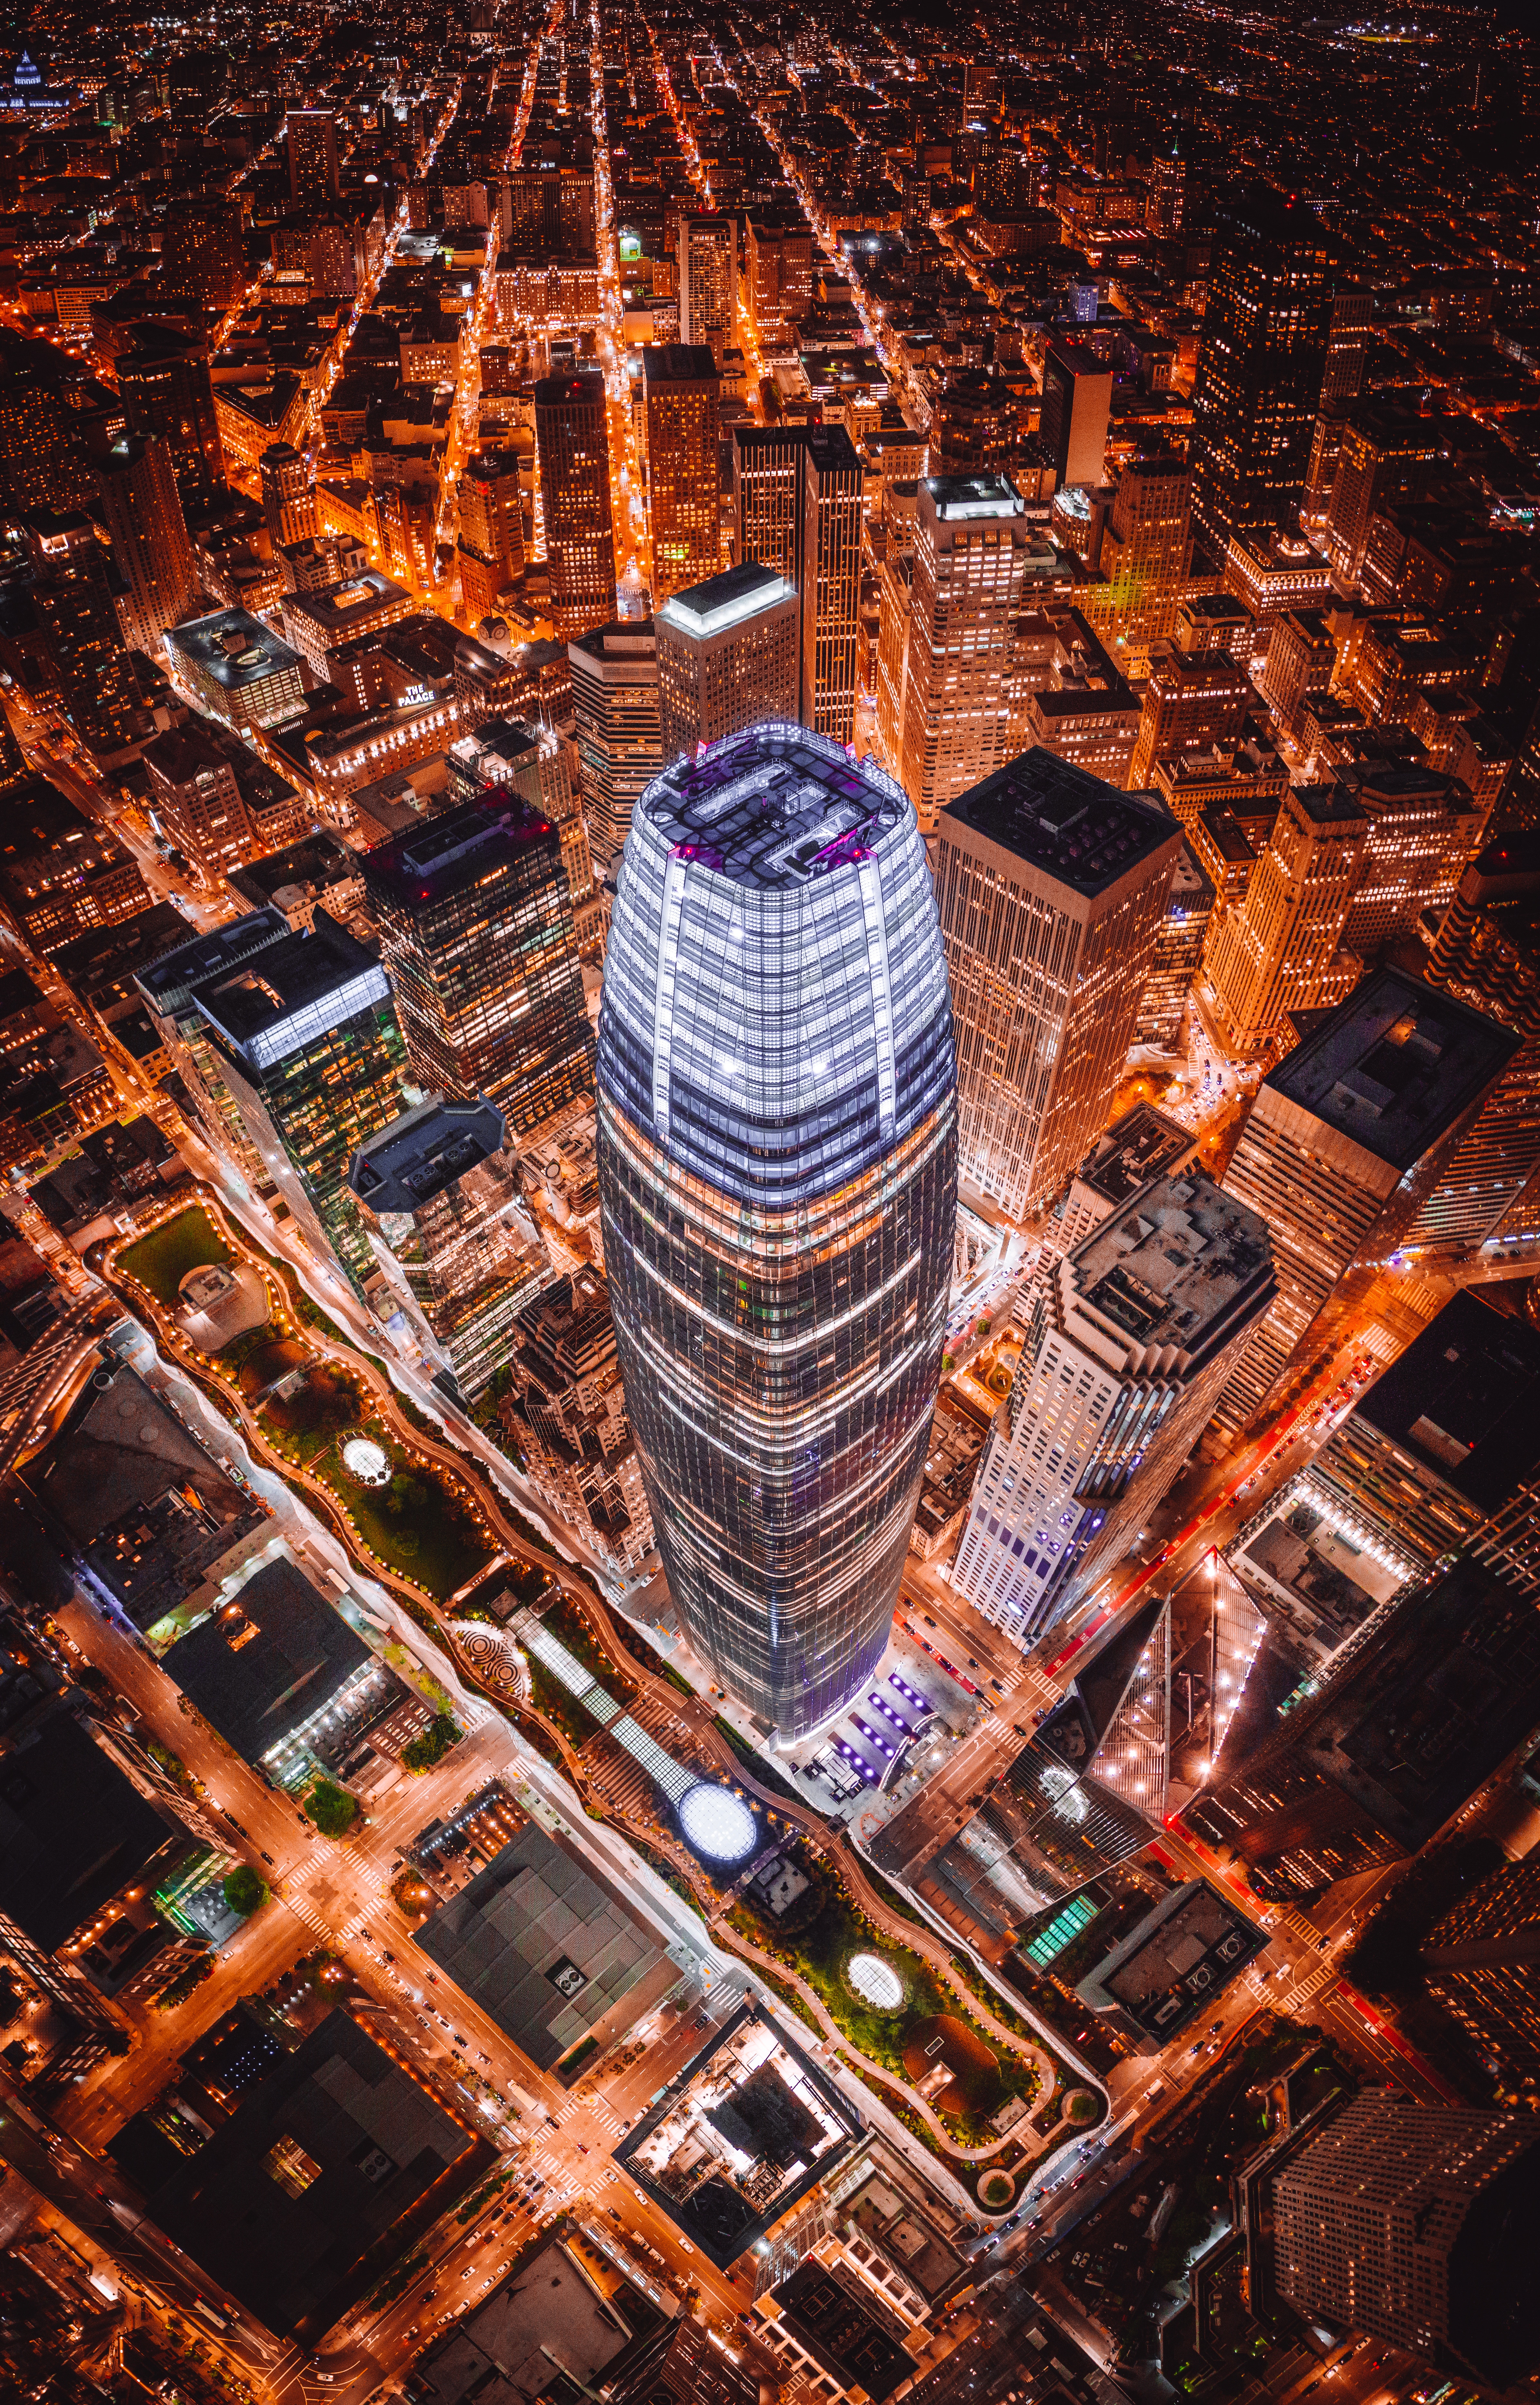 roof, tower, cities, architecture, building, view from above, night city, skyscrapers, roofs, towers Full HD